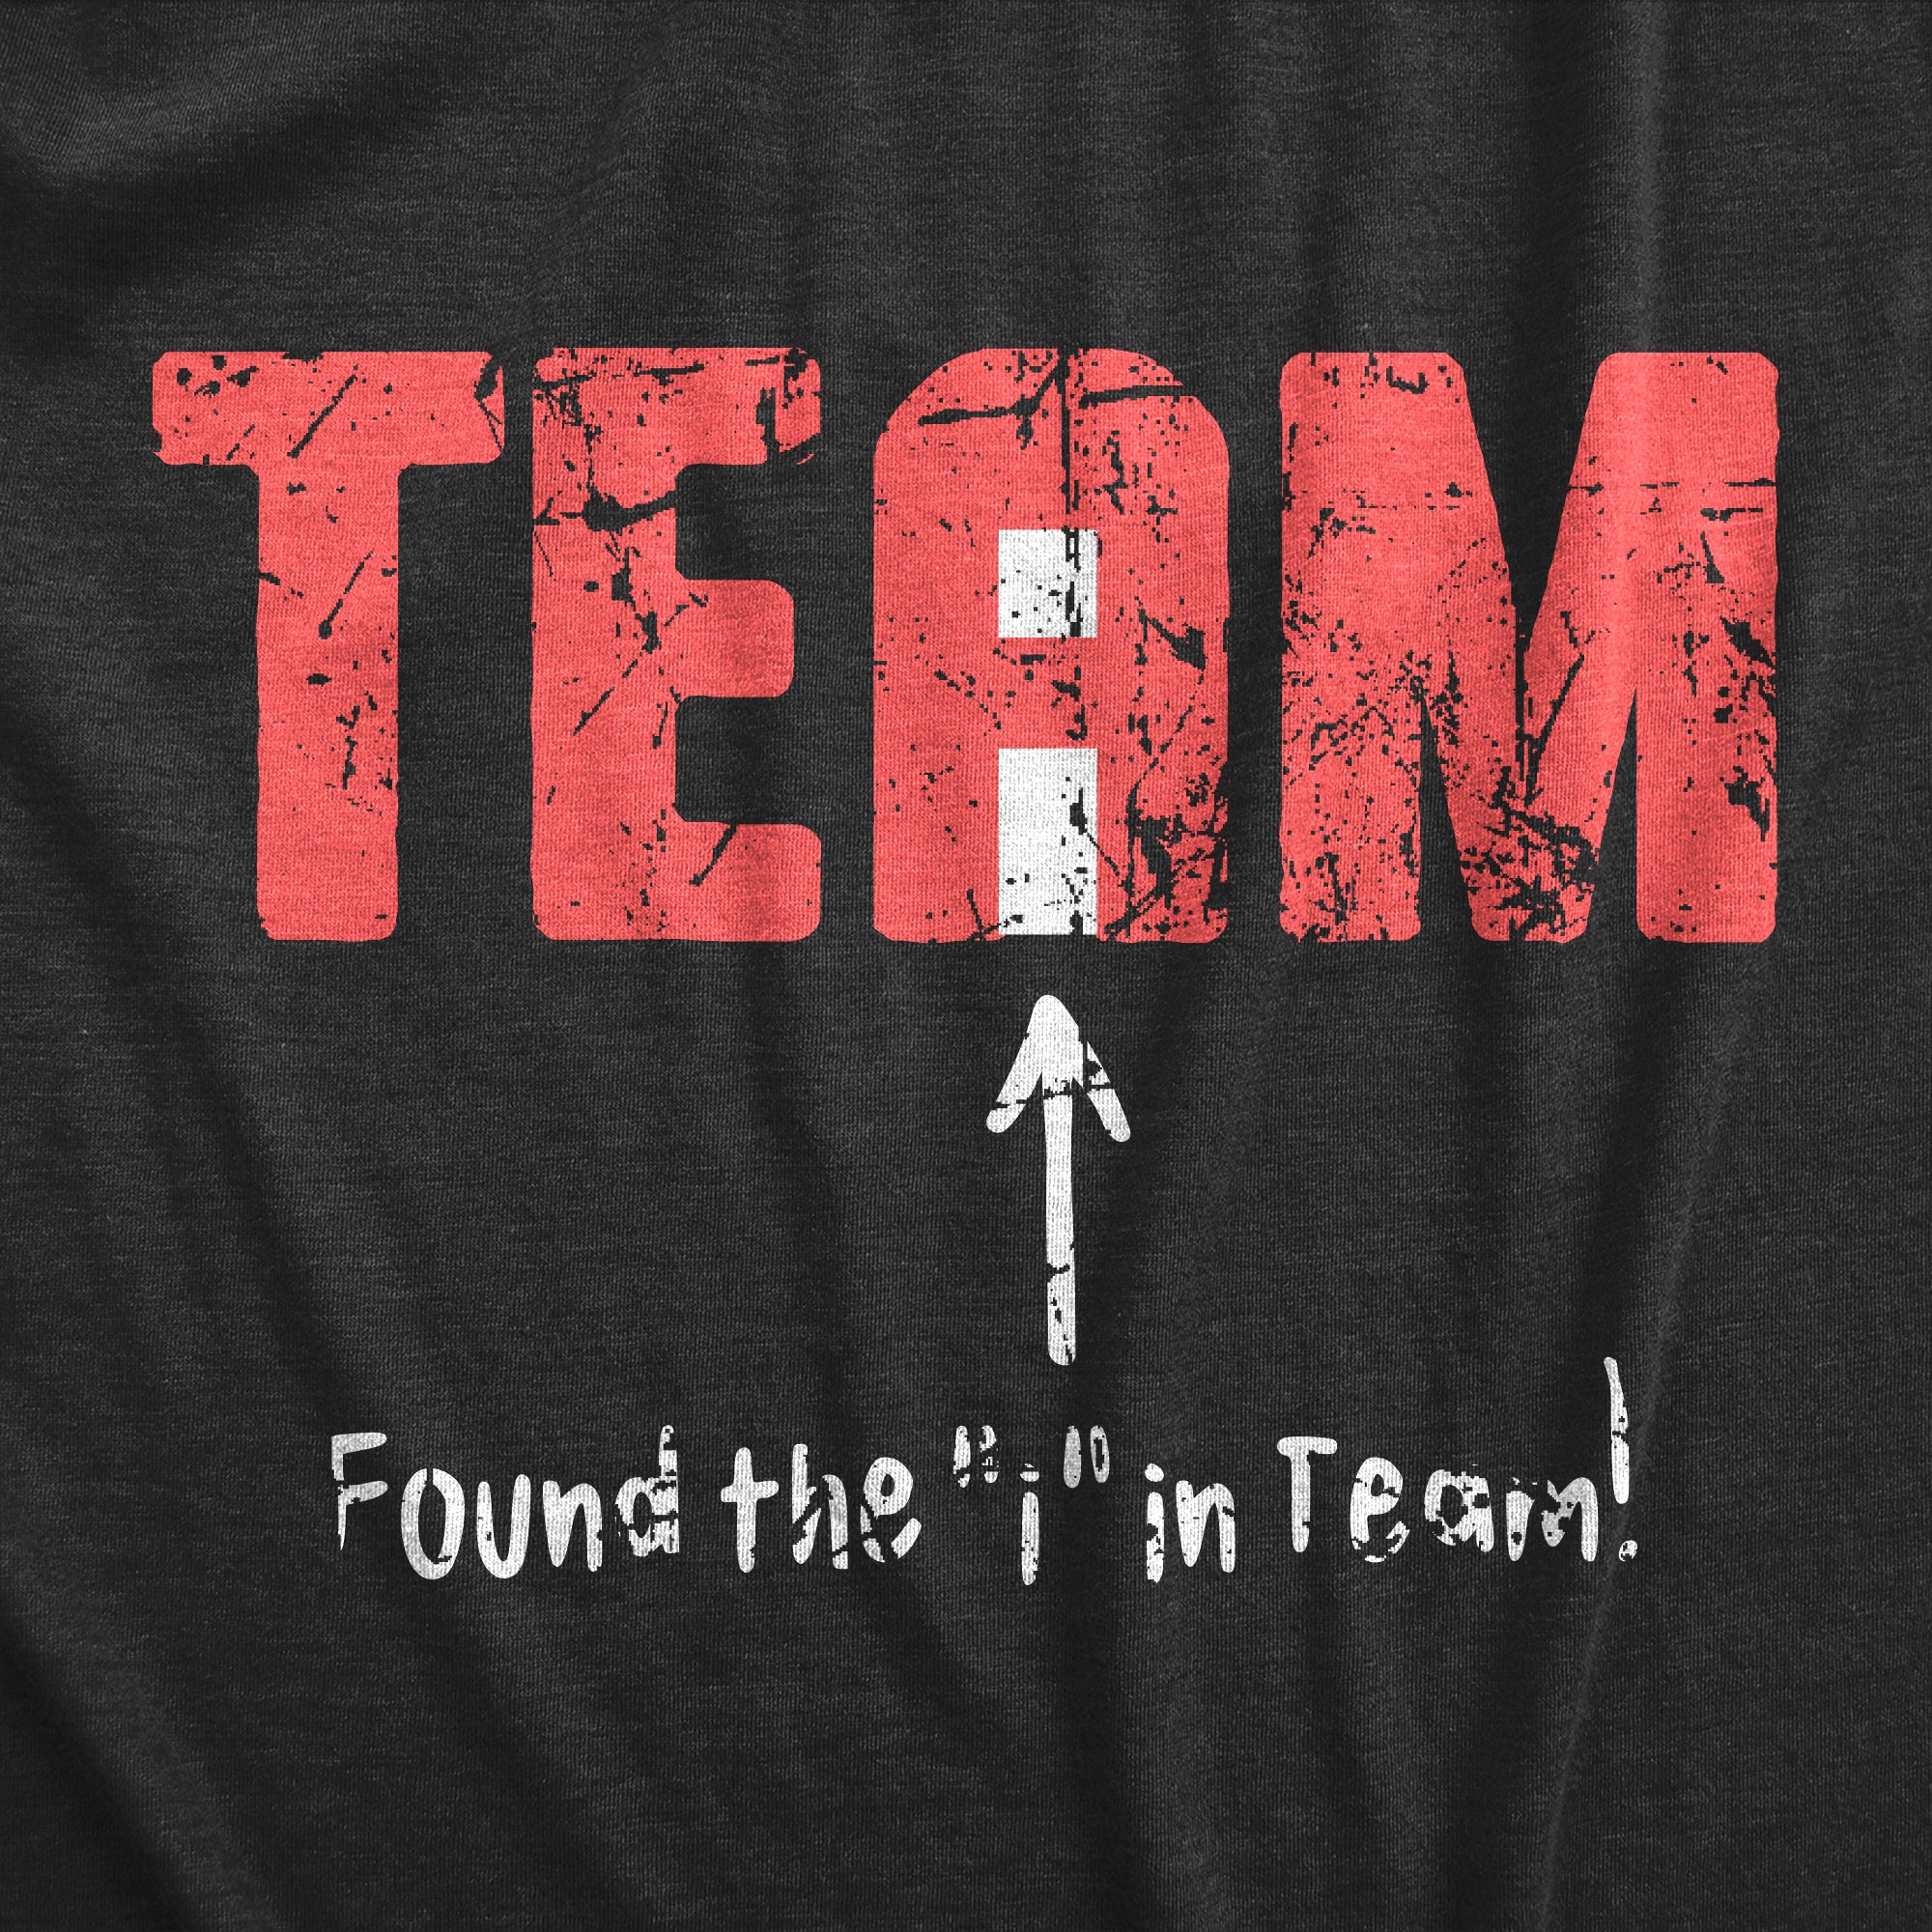 Funny Heather Black - TEAM Found The I In Team Womens T Shirt Nerdy Sarcastic Tee